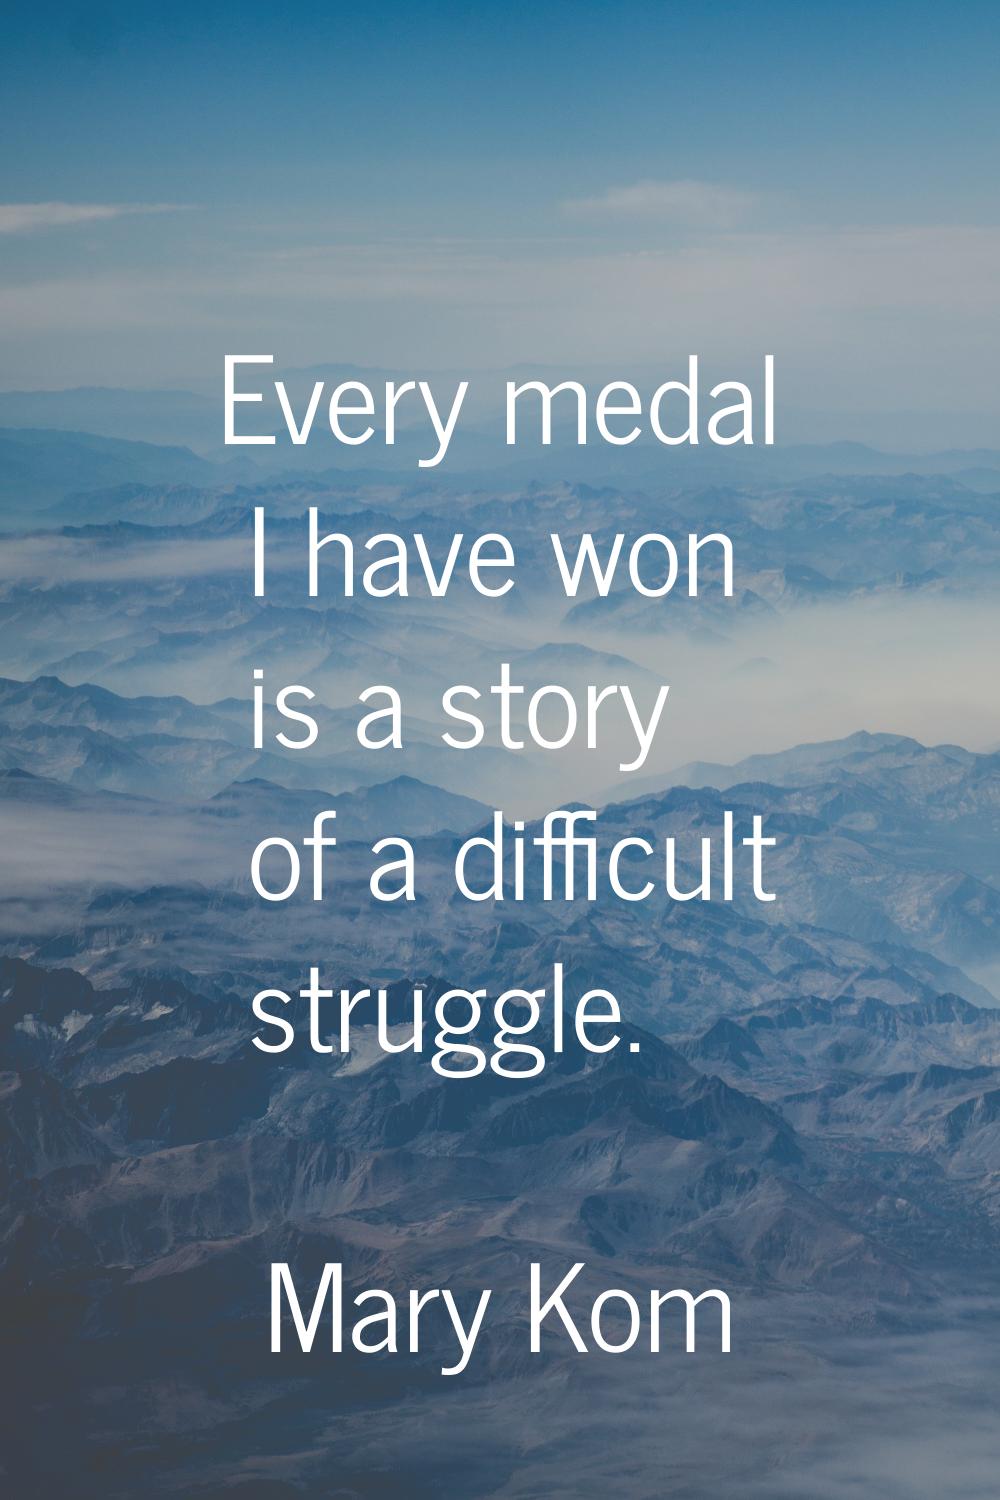 Every medal I have won is a story of a difficult struggle.